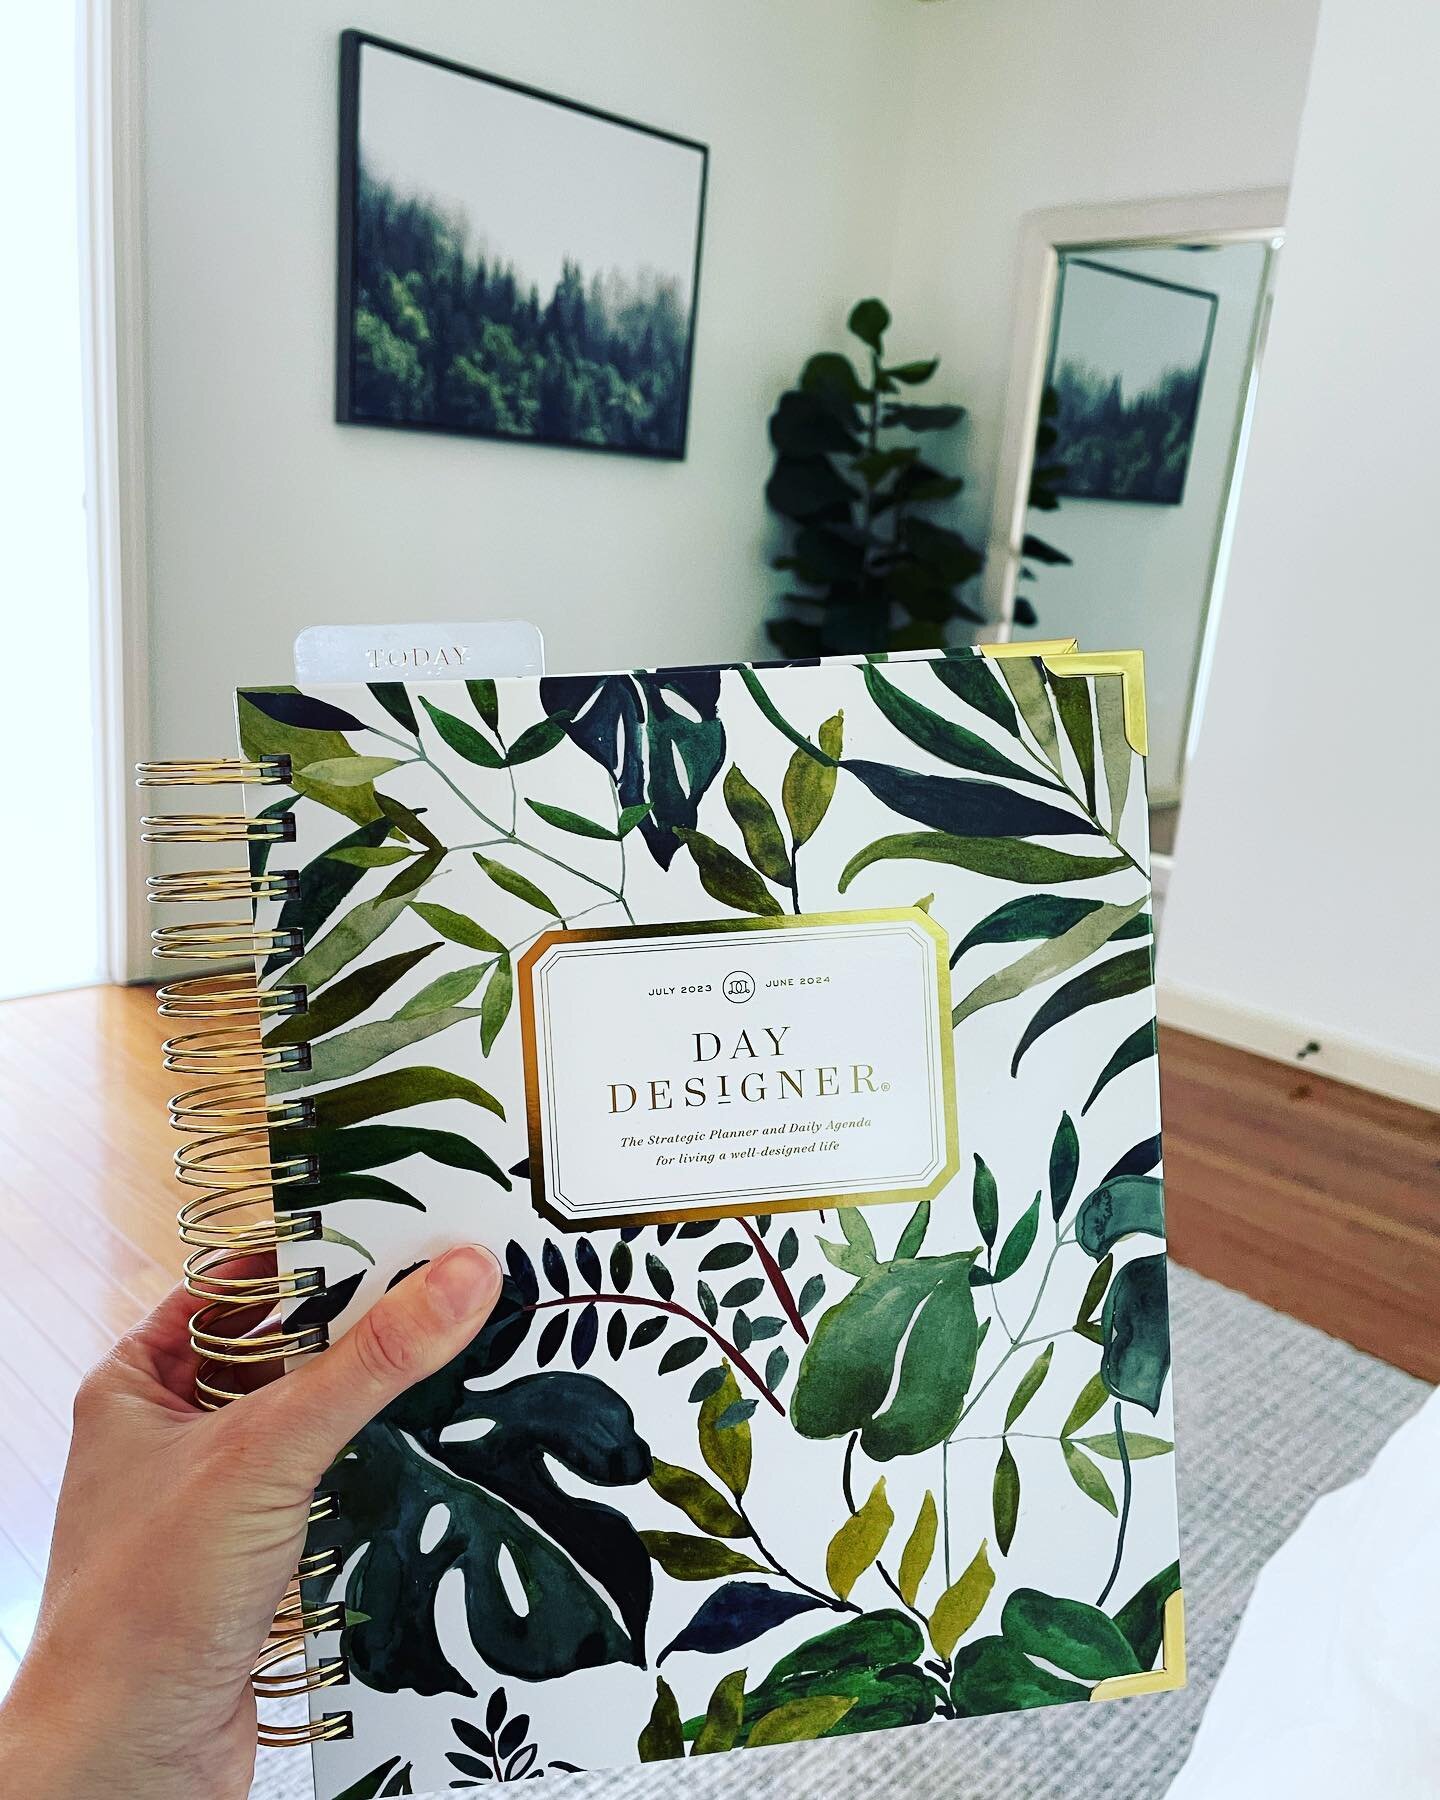 Let me tell you why I love @thedaydesigner planner. 

I thrive in an organized environment. And, I love to build in space where I give myself permission to just &ldquo;be&rdquo;. 

When it comes to planning, I&rsquo;ve tried many planners. For the pa